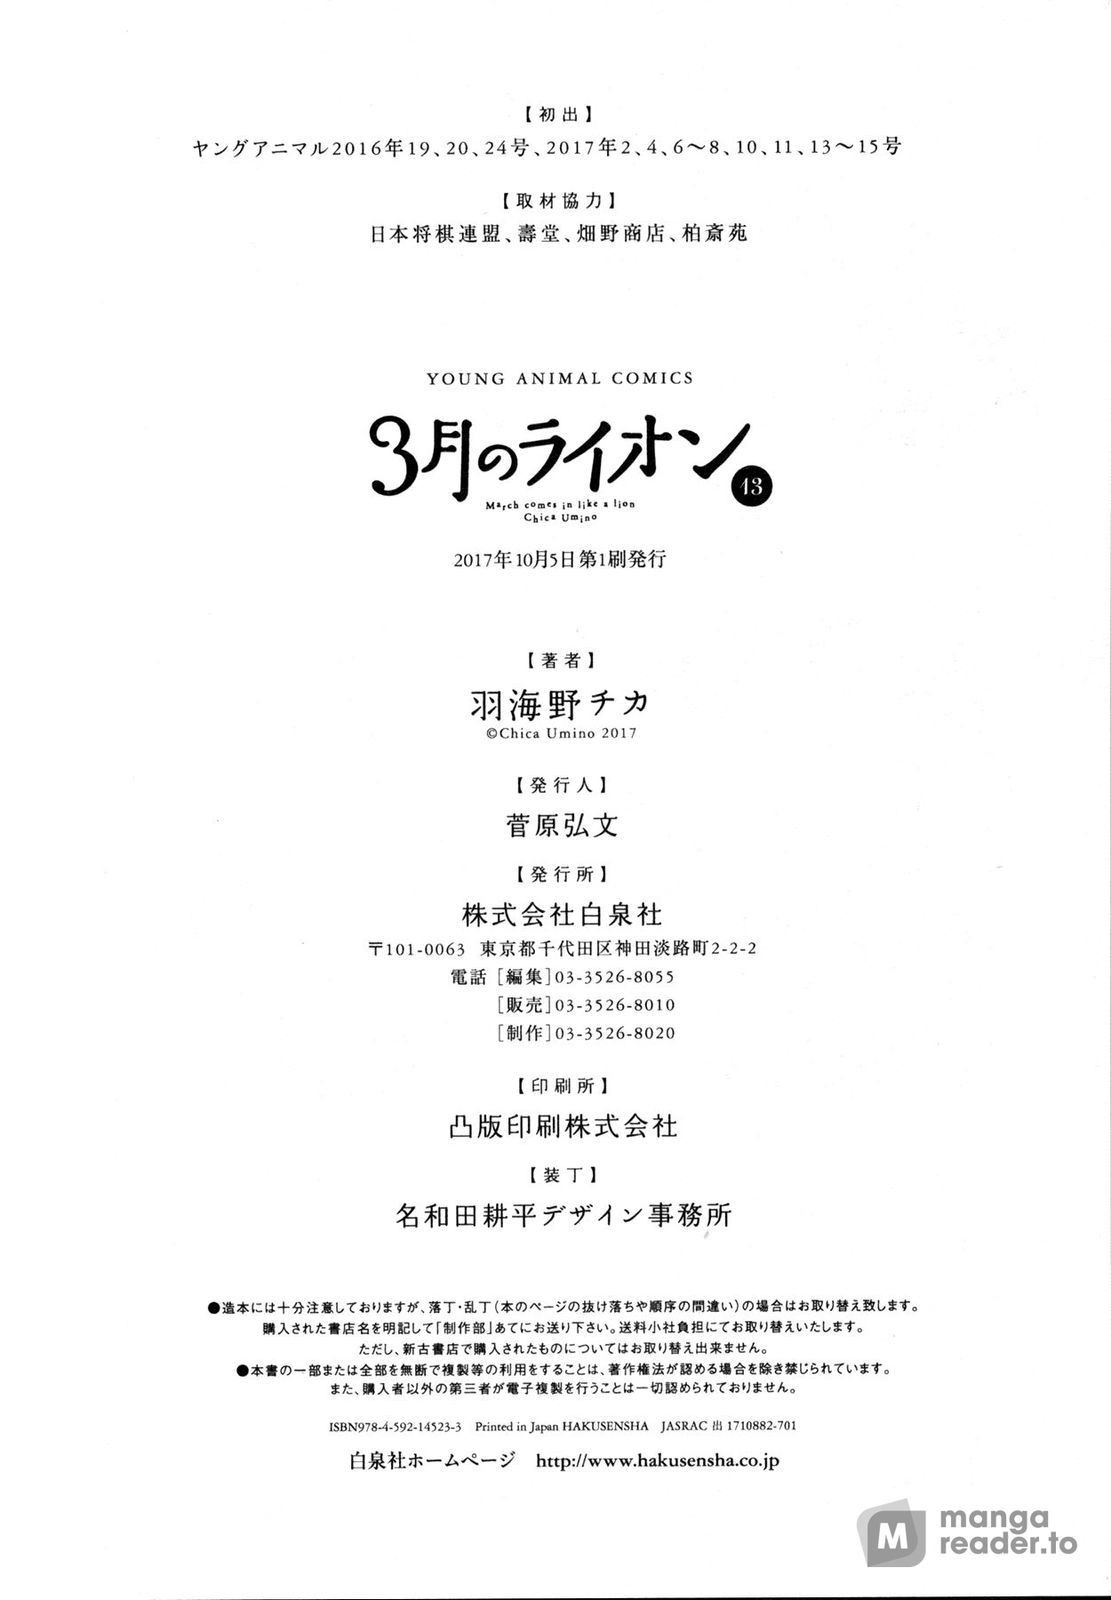 March Comes in Like a Lion, Chapter 139.5 Vol 13 Extra (EN) image 10